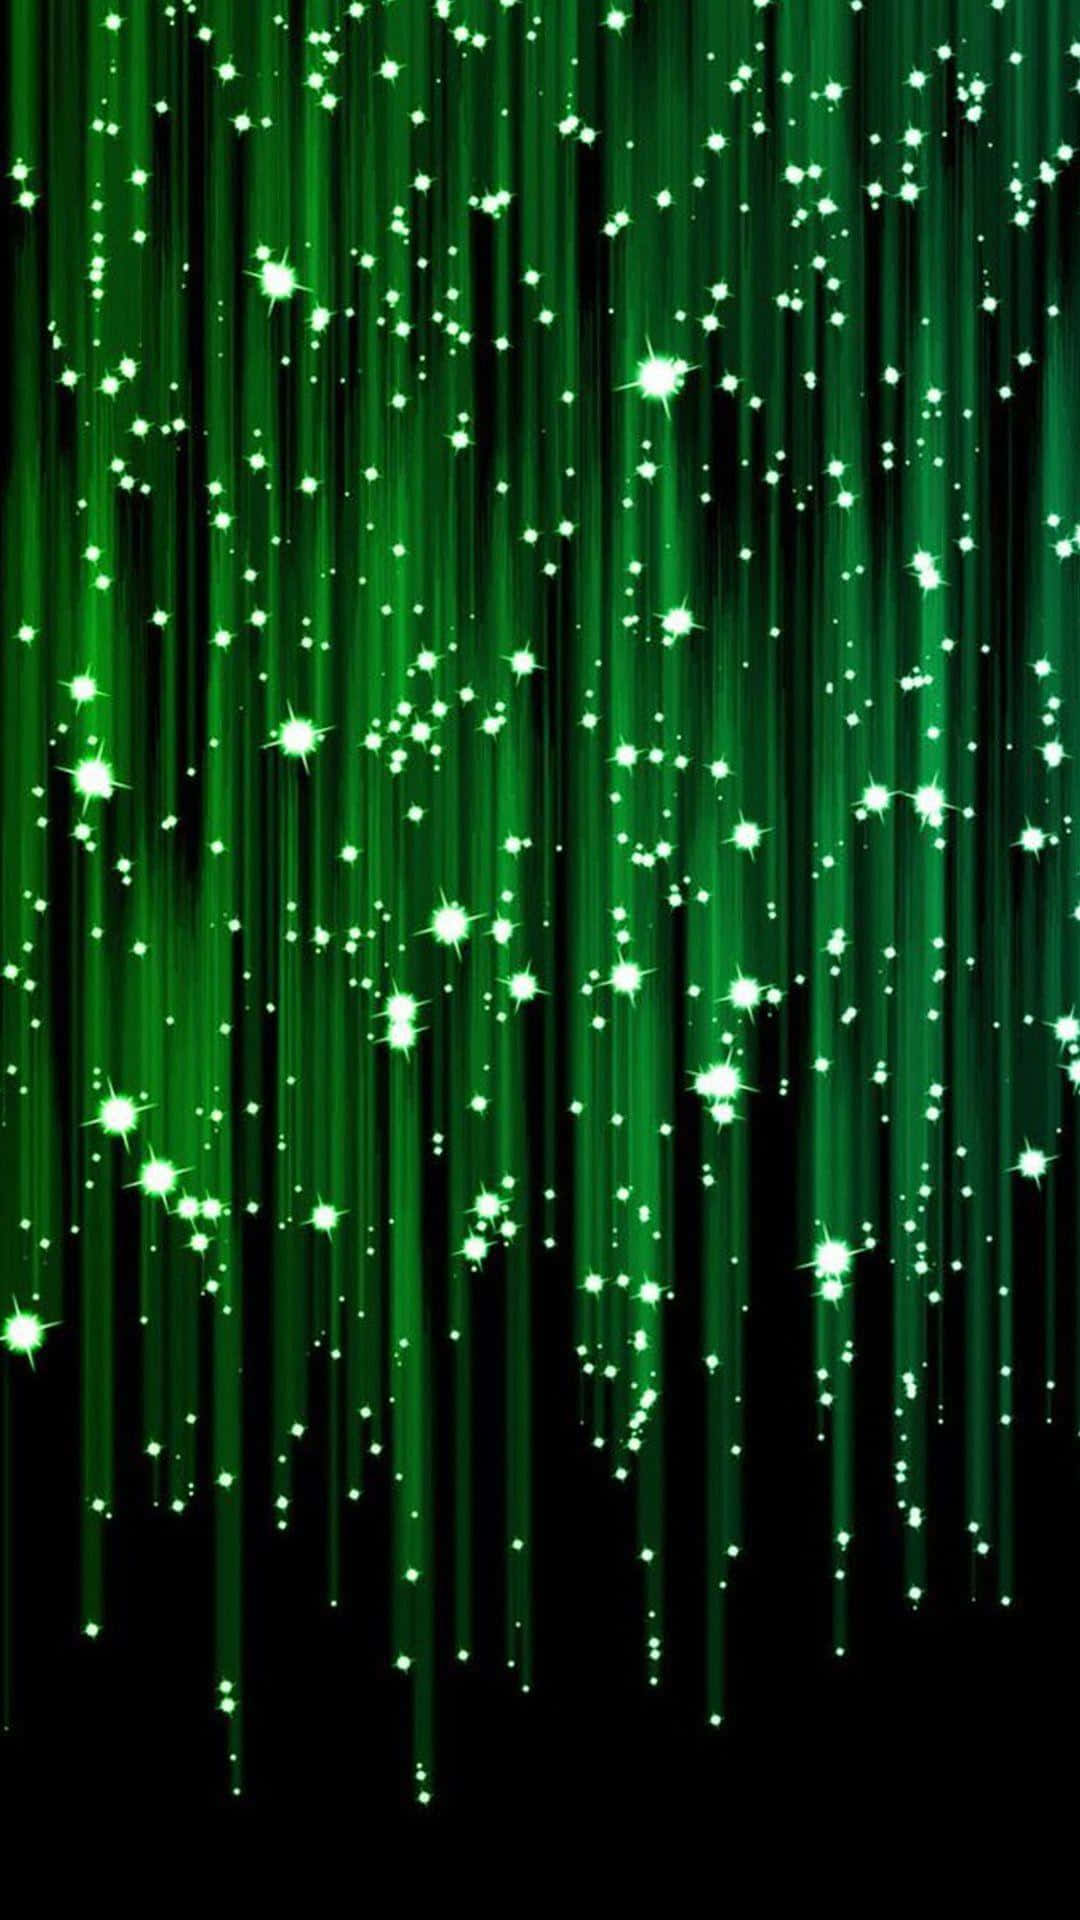 Explore the wonders of the universe in Green Galaxy Wallpaper